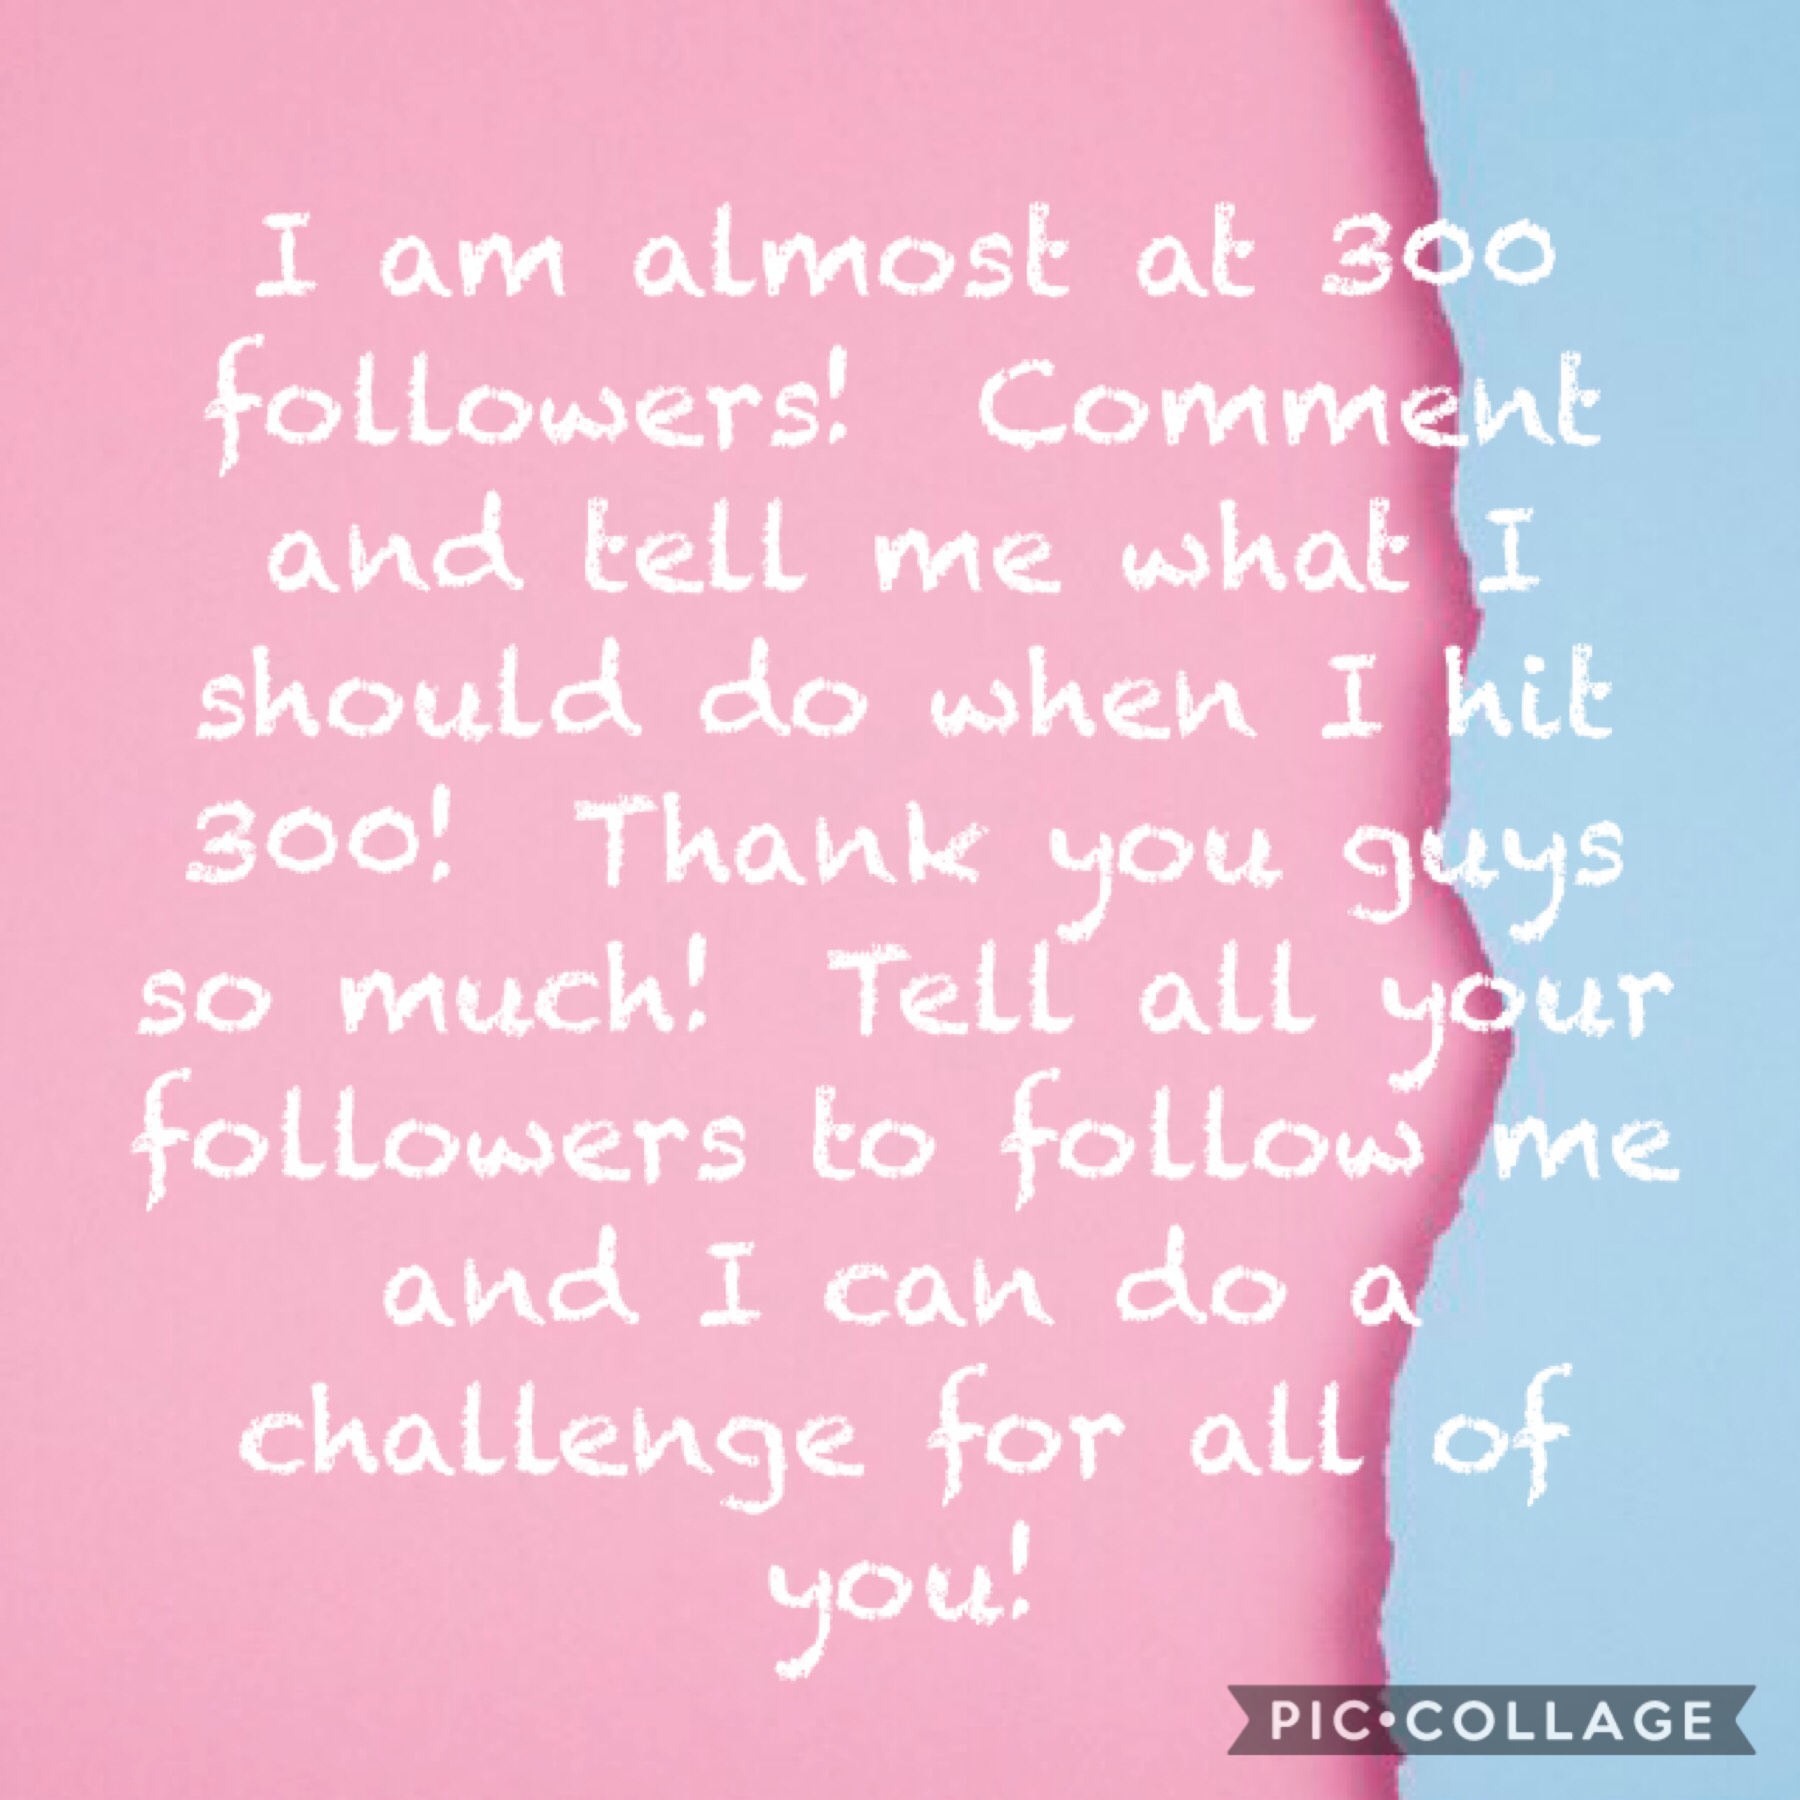 Comment and give me a challenge to do for when I hit 300 followers!  I will give a shoutout to the first person to give me a challenge! ❤️❤️❤️